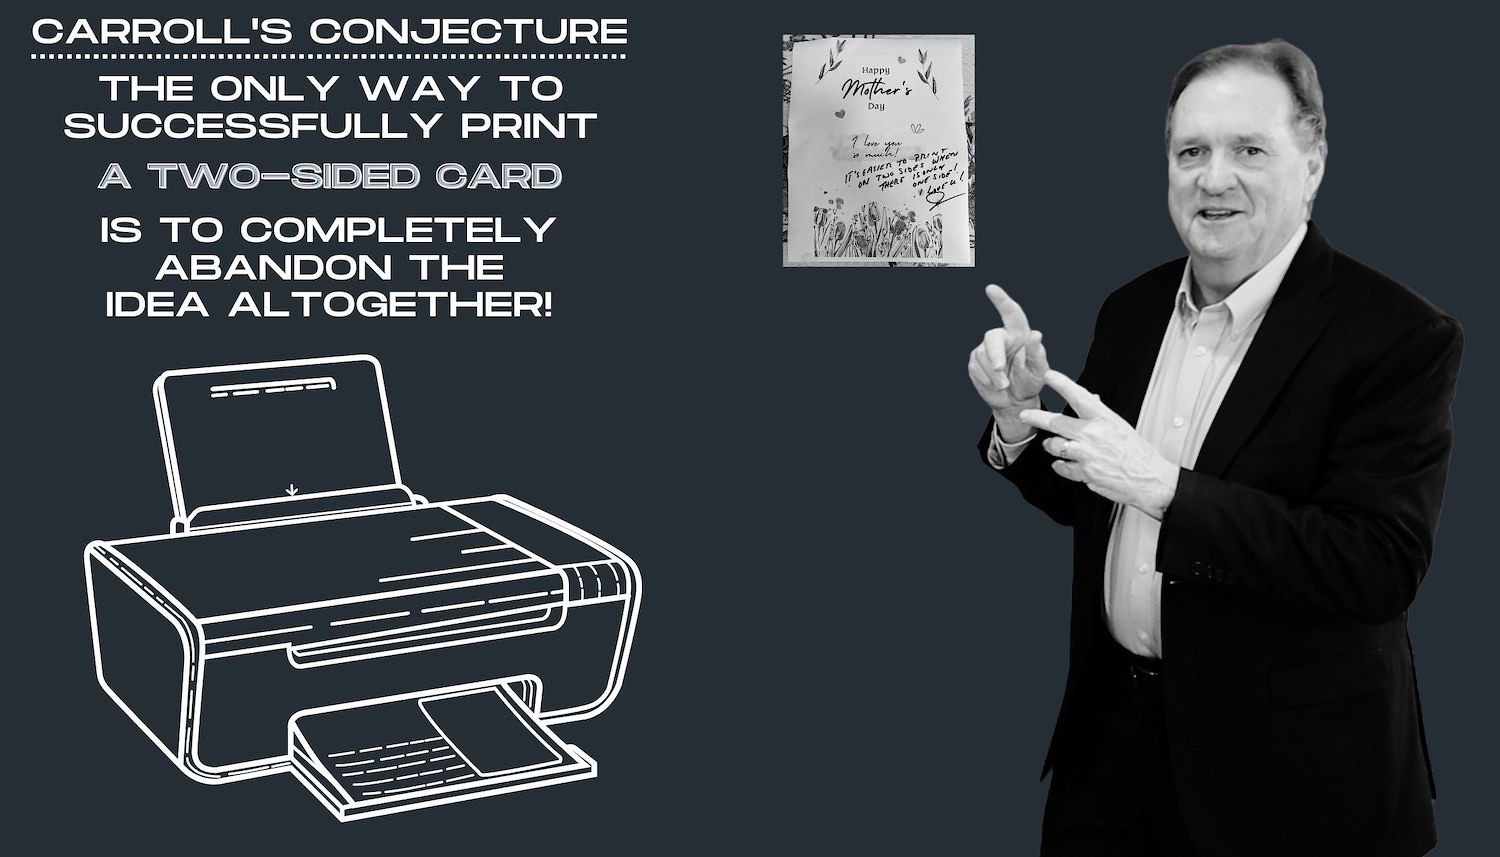 "The only way to successfully print a two-sided card is to completely abandon the idea altogether!" - Futurist Jim Carroll